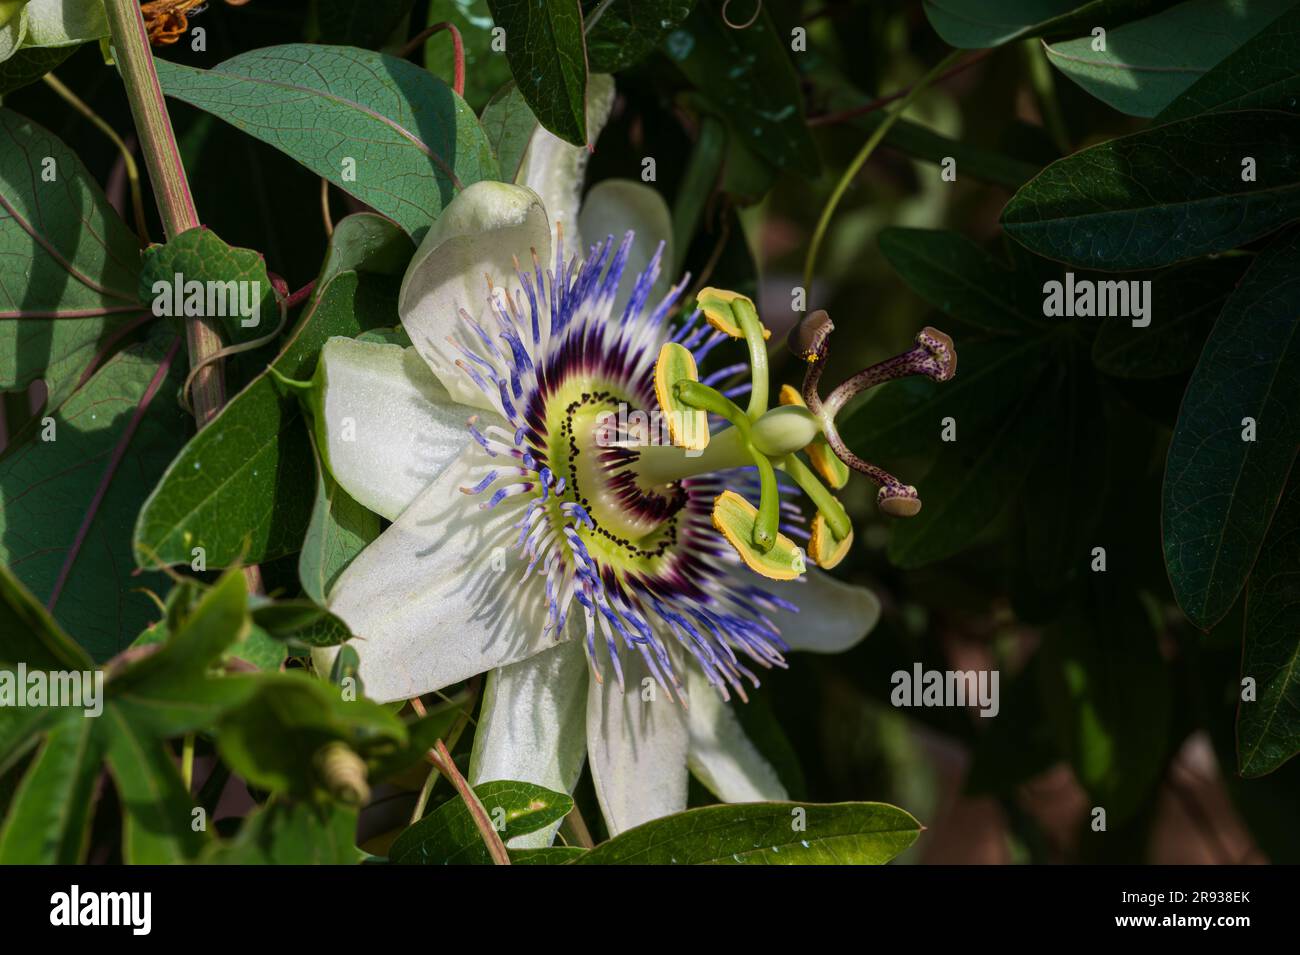 Passiflora L. is a genus of plants of the Passifloraceae family which includes over 570 species of perennial and annual herbaceous plants, shrubs with Stock Photo